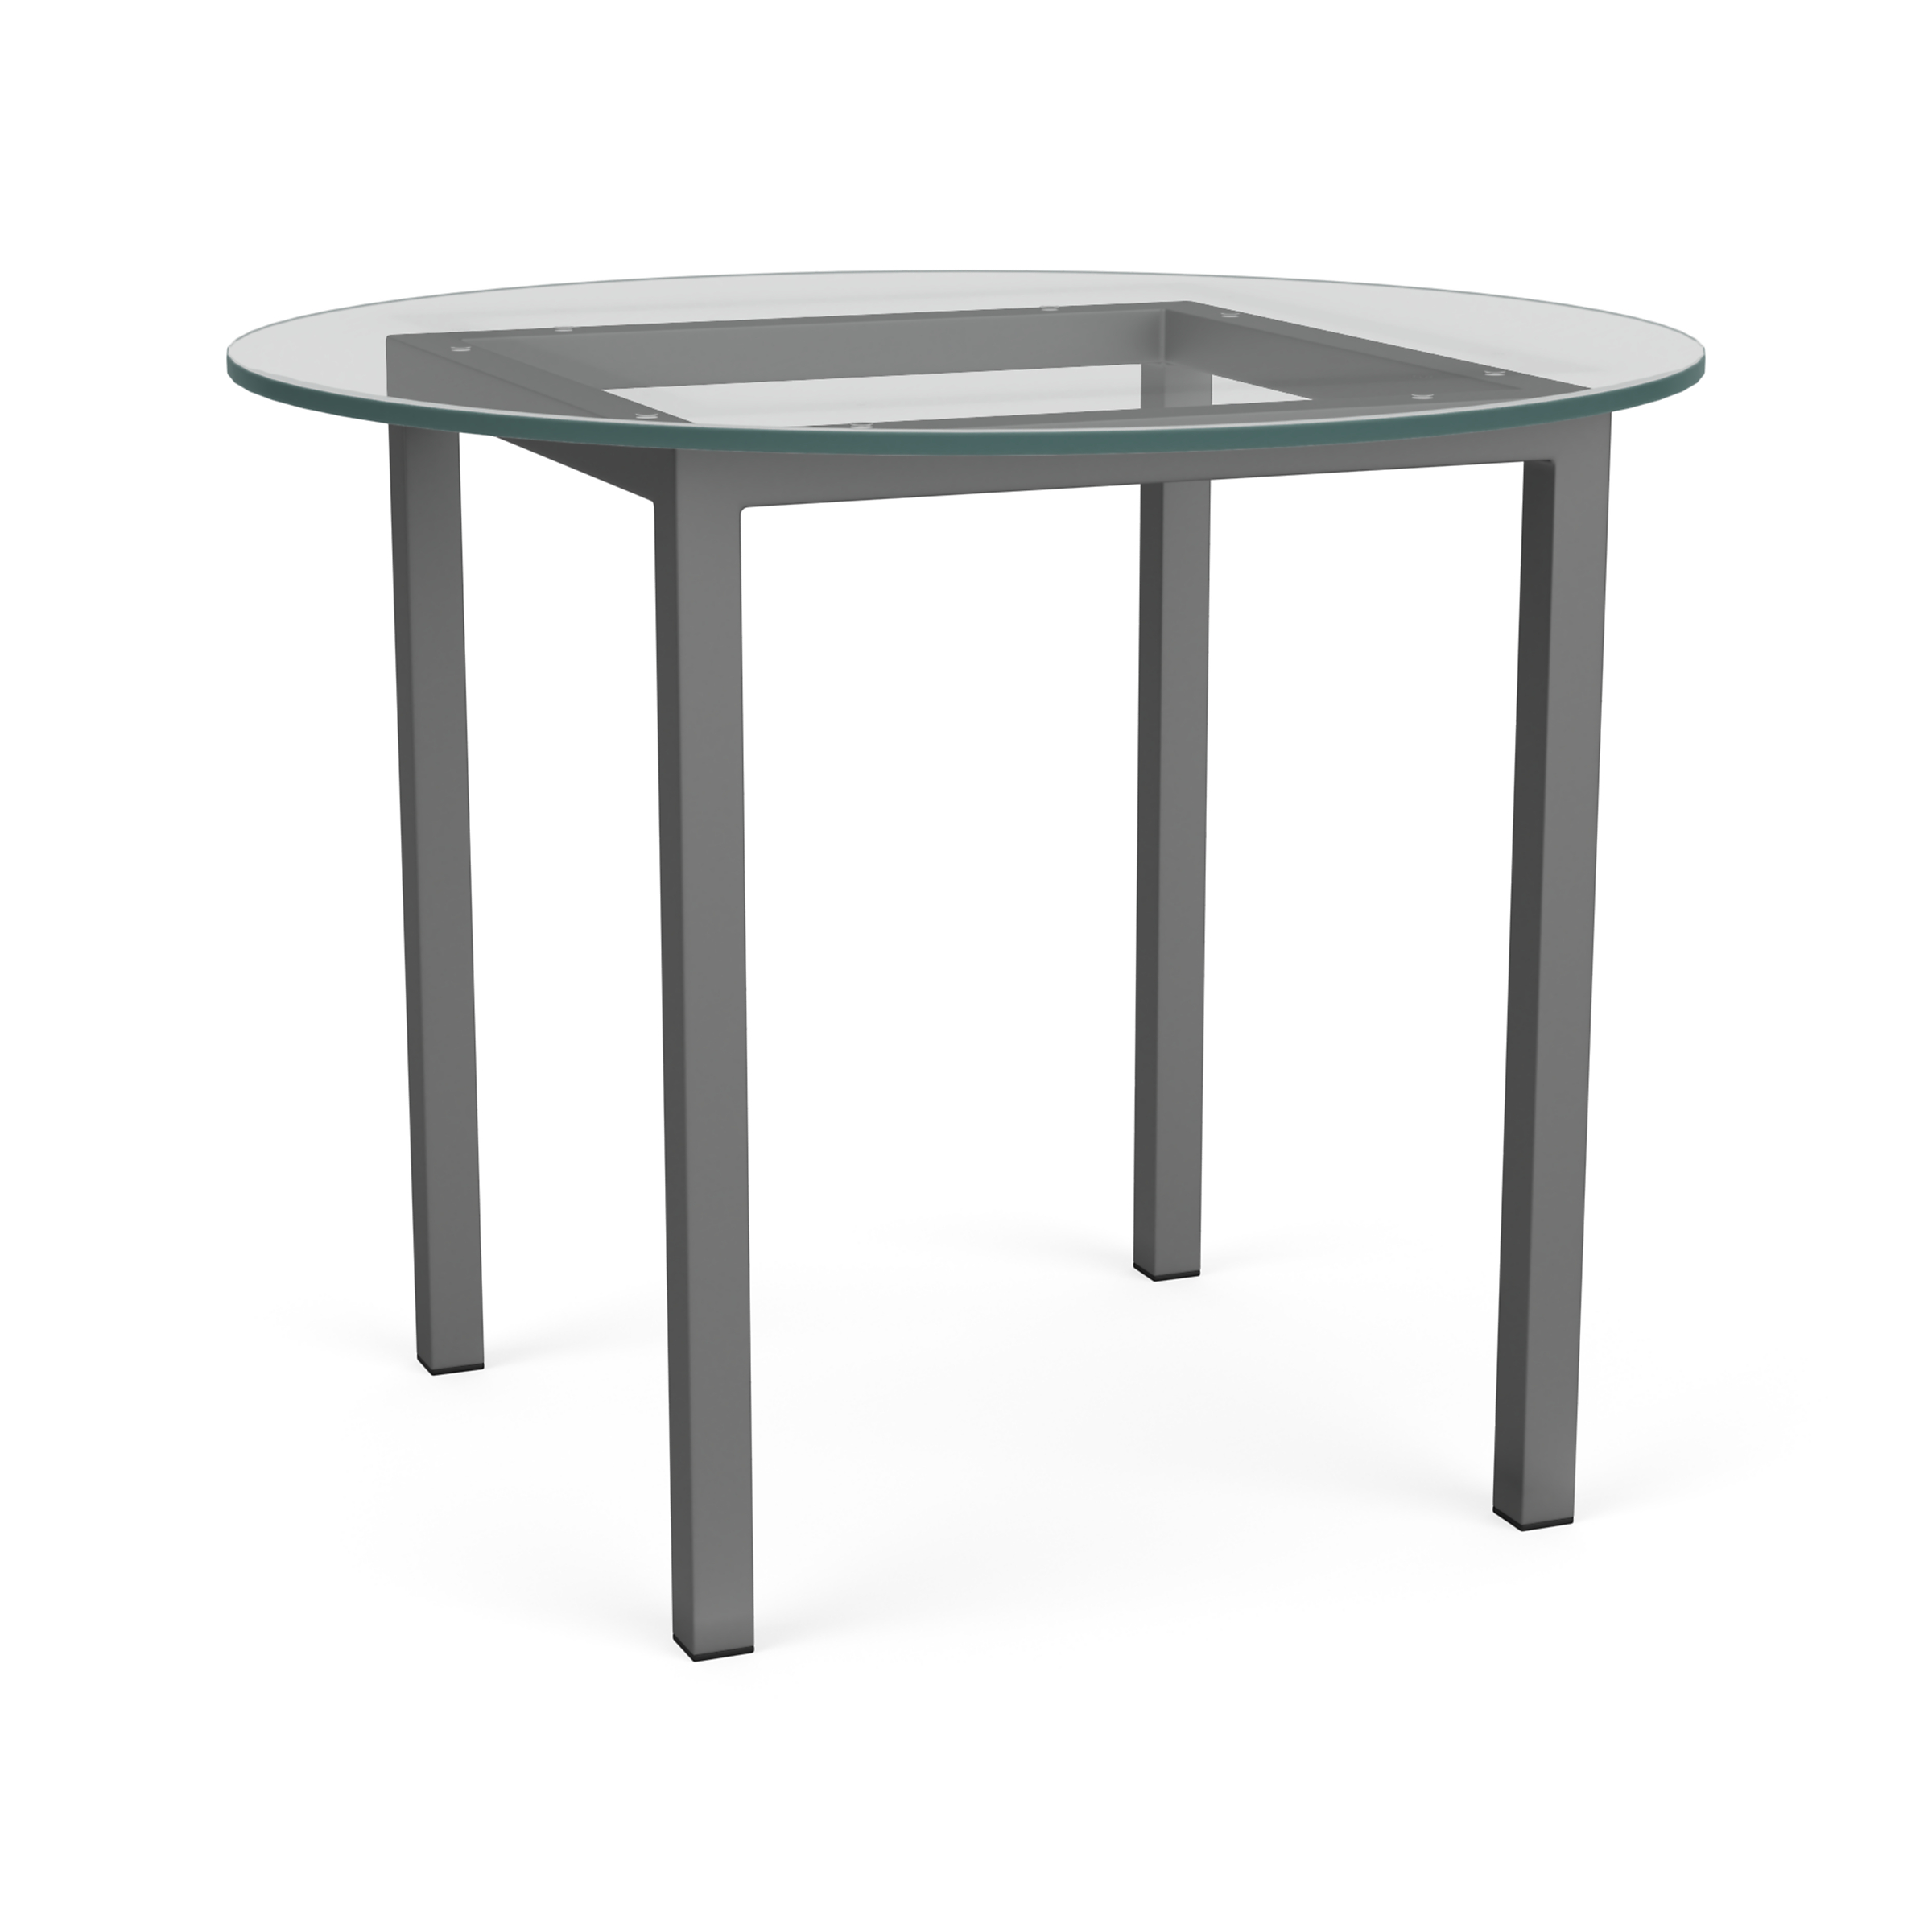 Parsons 36 diam 1.5" Outdoor Table in Graphite with Clear Glass Top